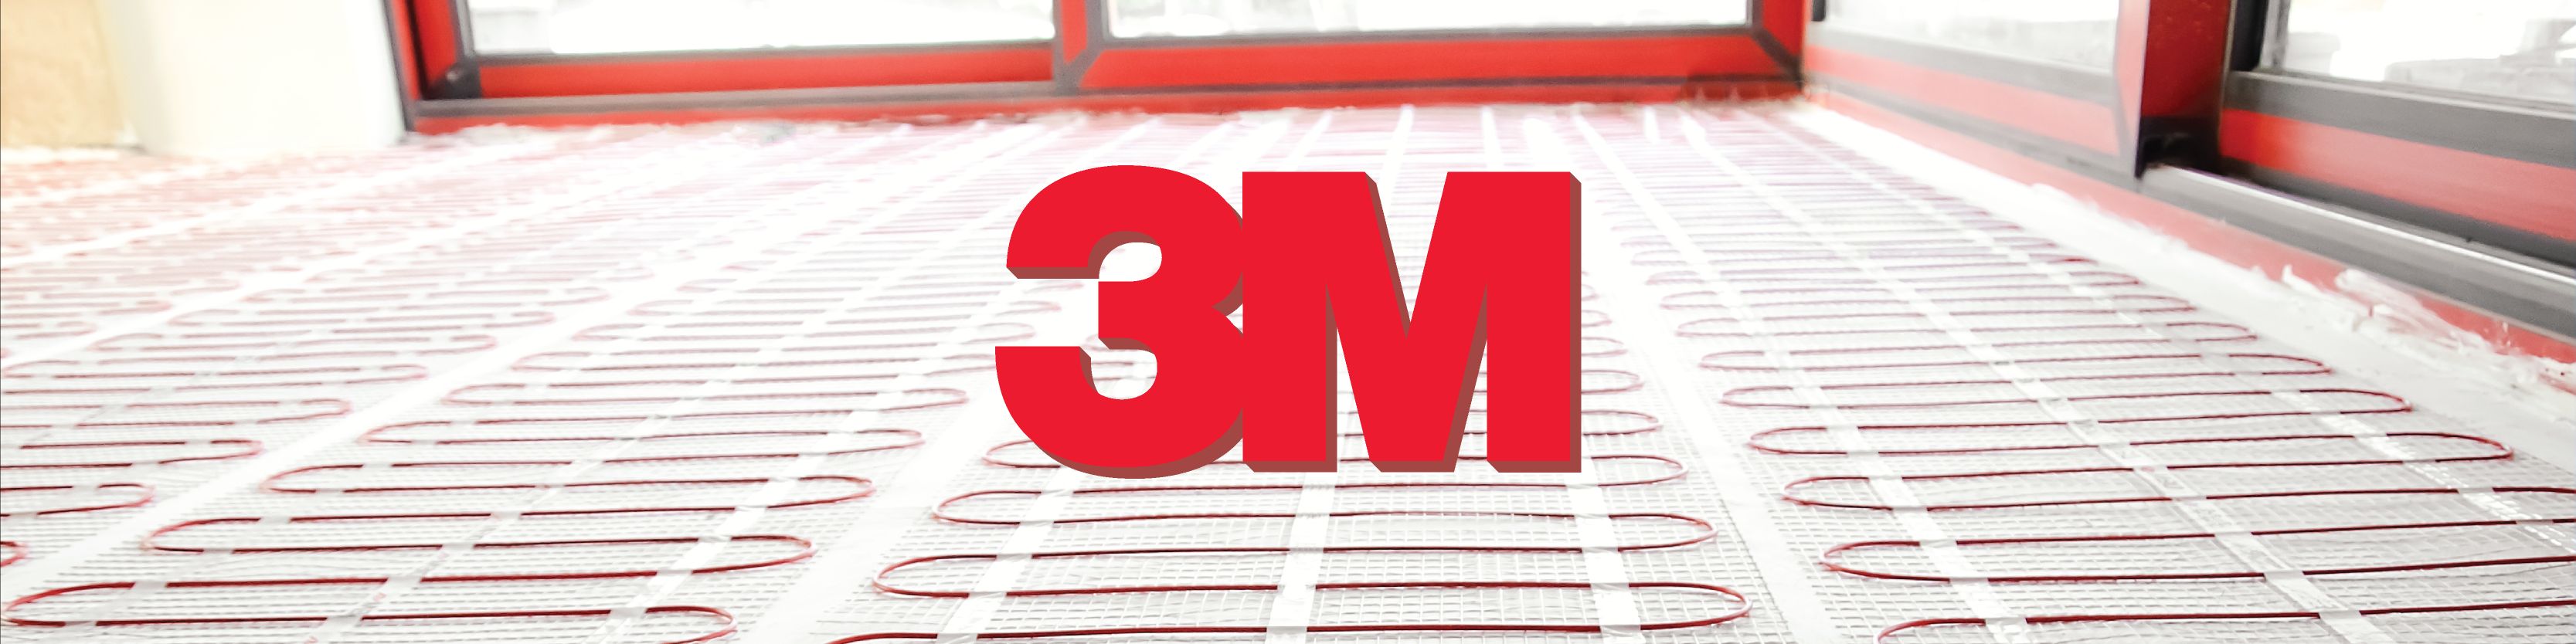 Texcan - News - Product News - Texcan Becomes a 3M Stocking Partner Banner